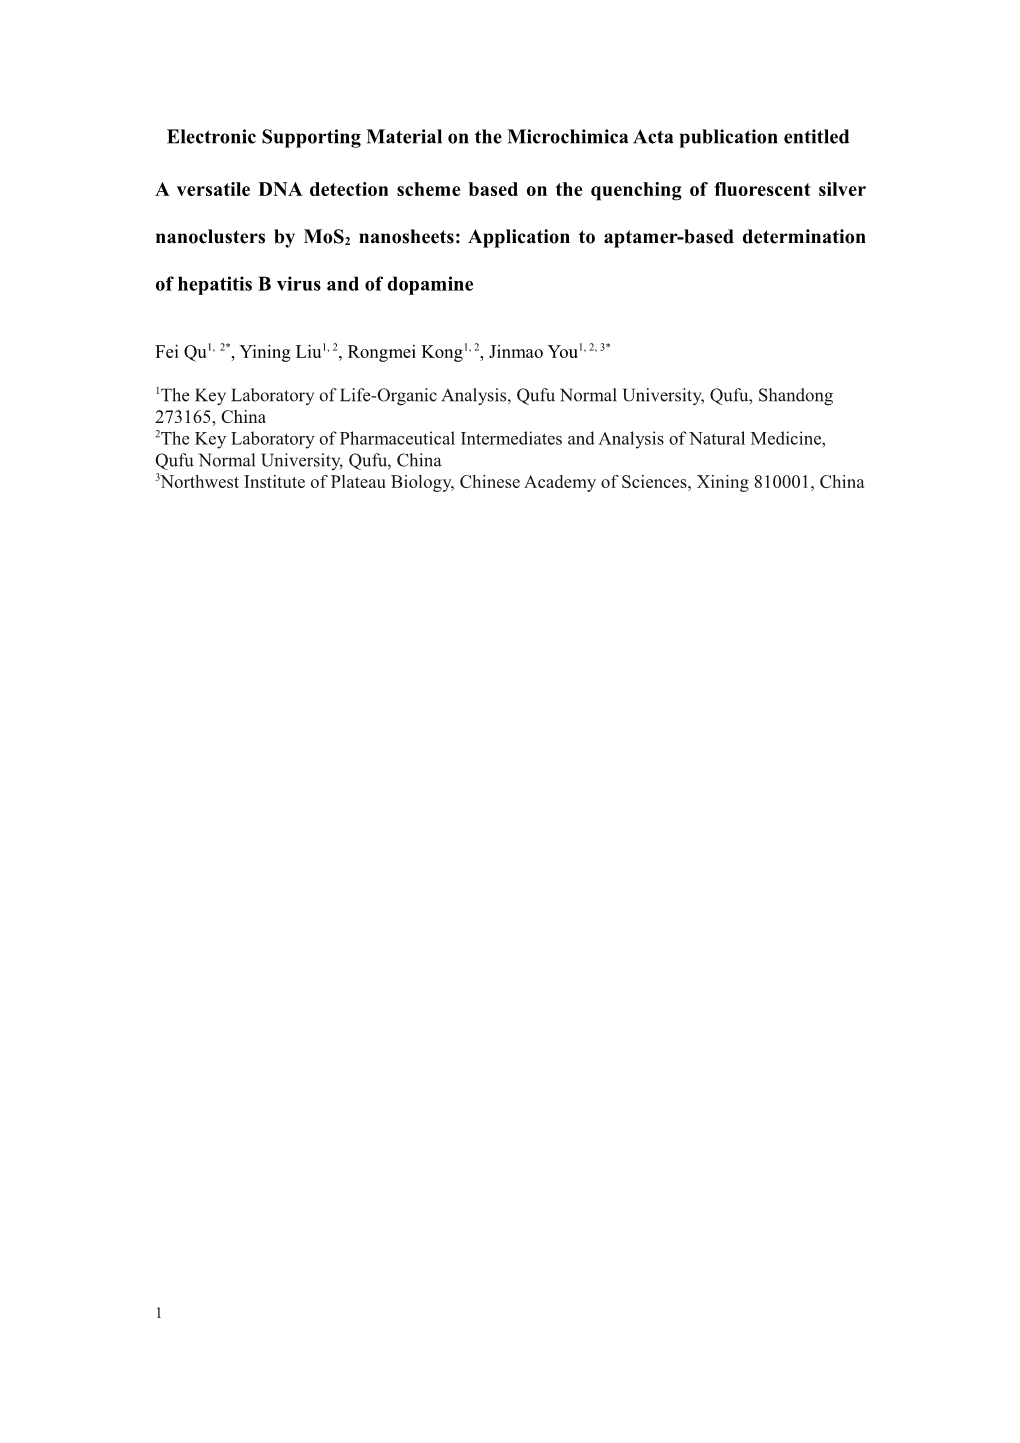 Electronic Supporting Material on the Microchimica Acta Publication Entitled